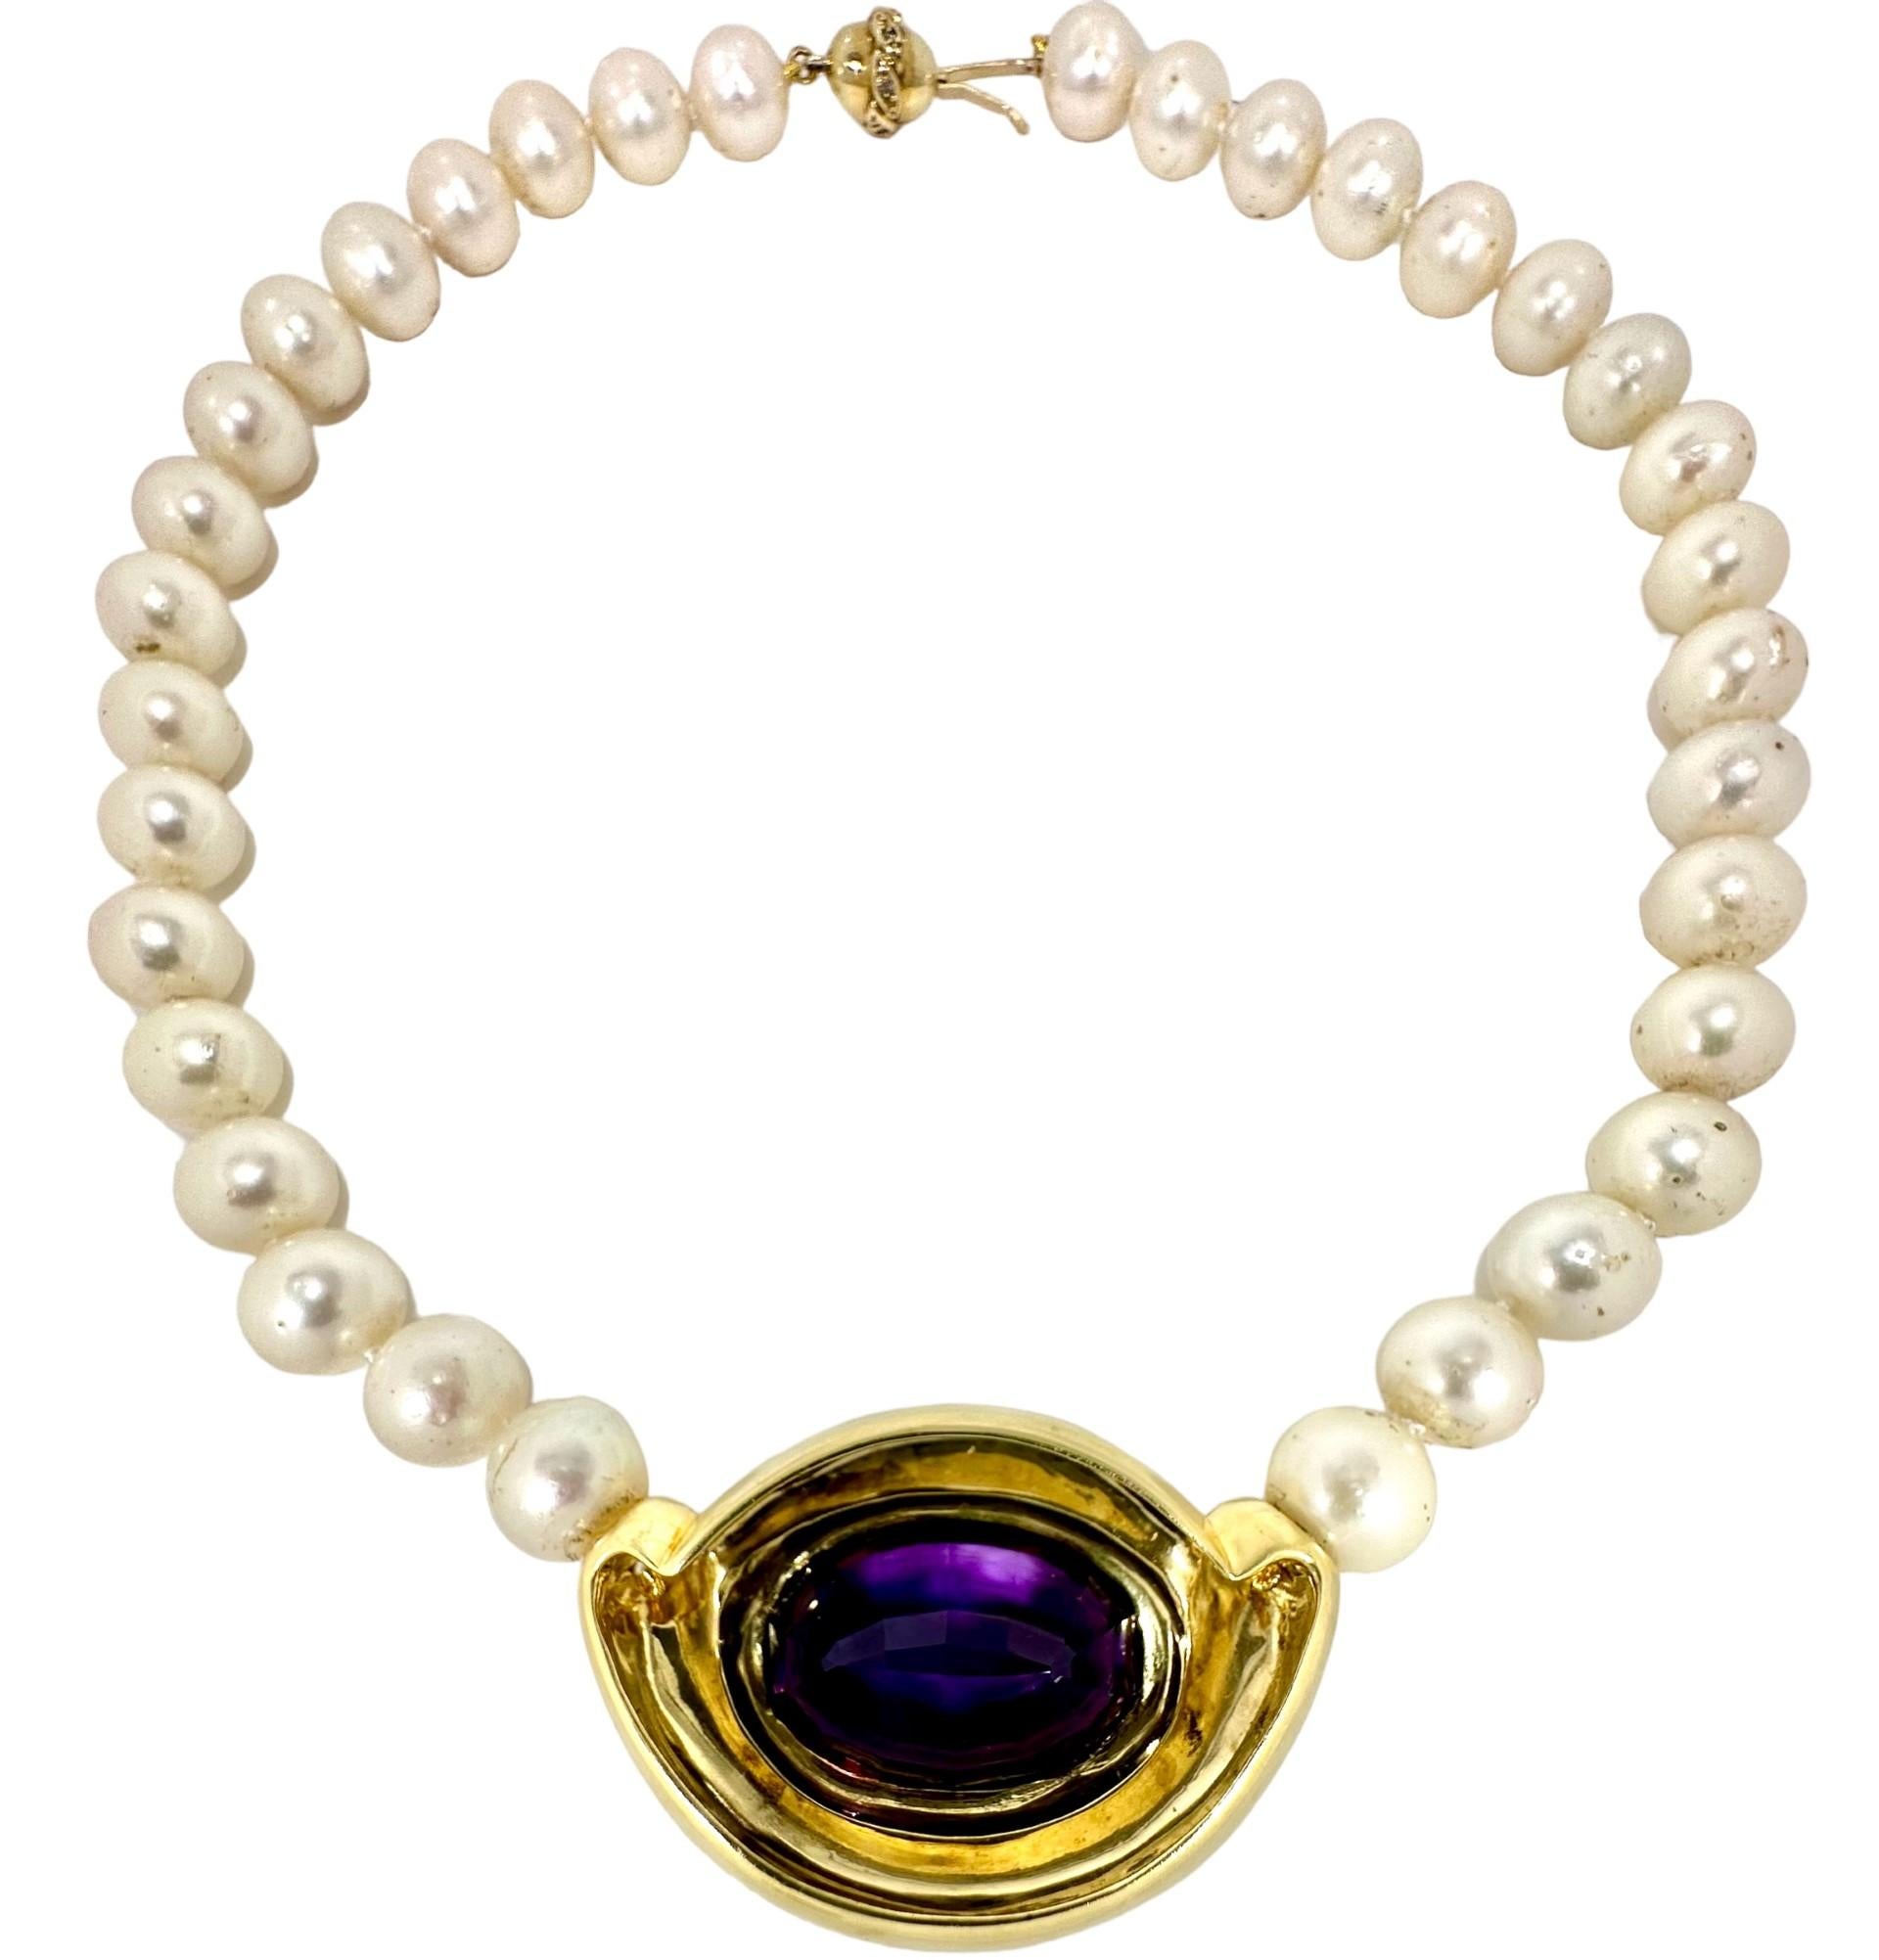 This lovely vintage choker length necklace is decidedly in the Modernist genre. A large and rich step cut amethyst weighing approximately 27.50 carats is cradled tastefully and prominently in a bombe centerpiece. Thirty four 10mm to 10.5mm Japanese